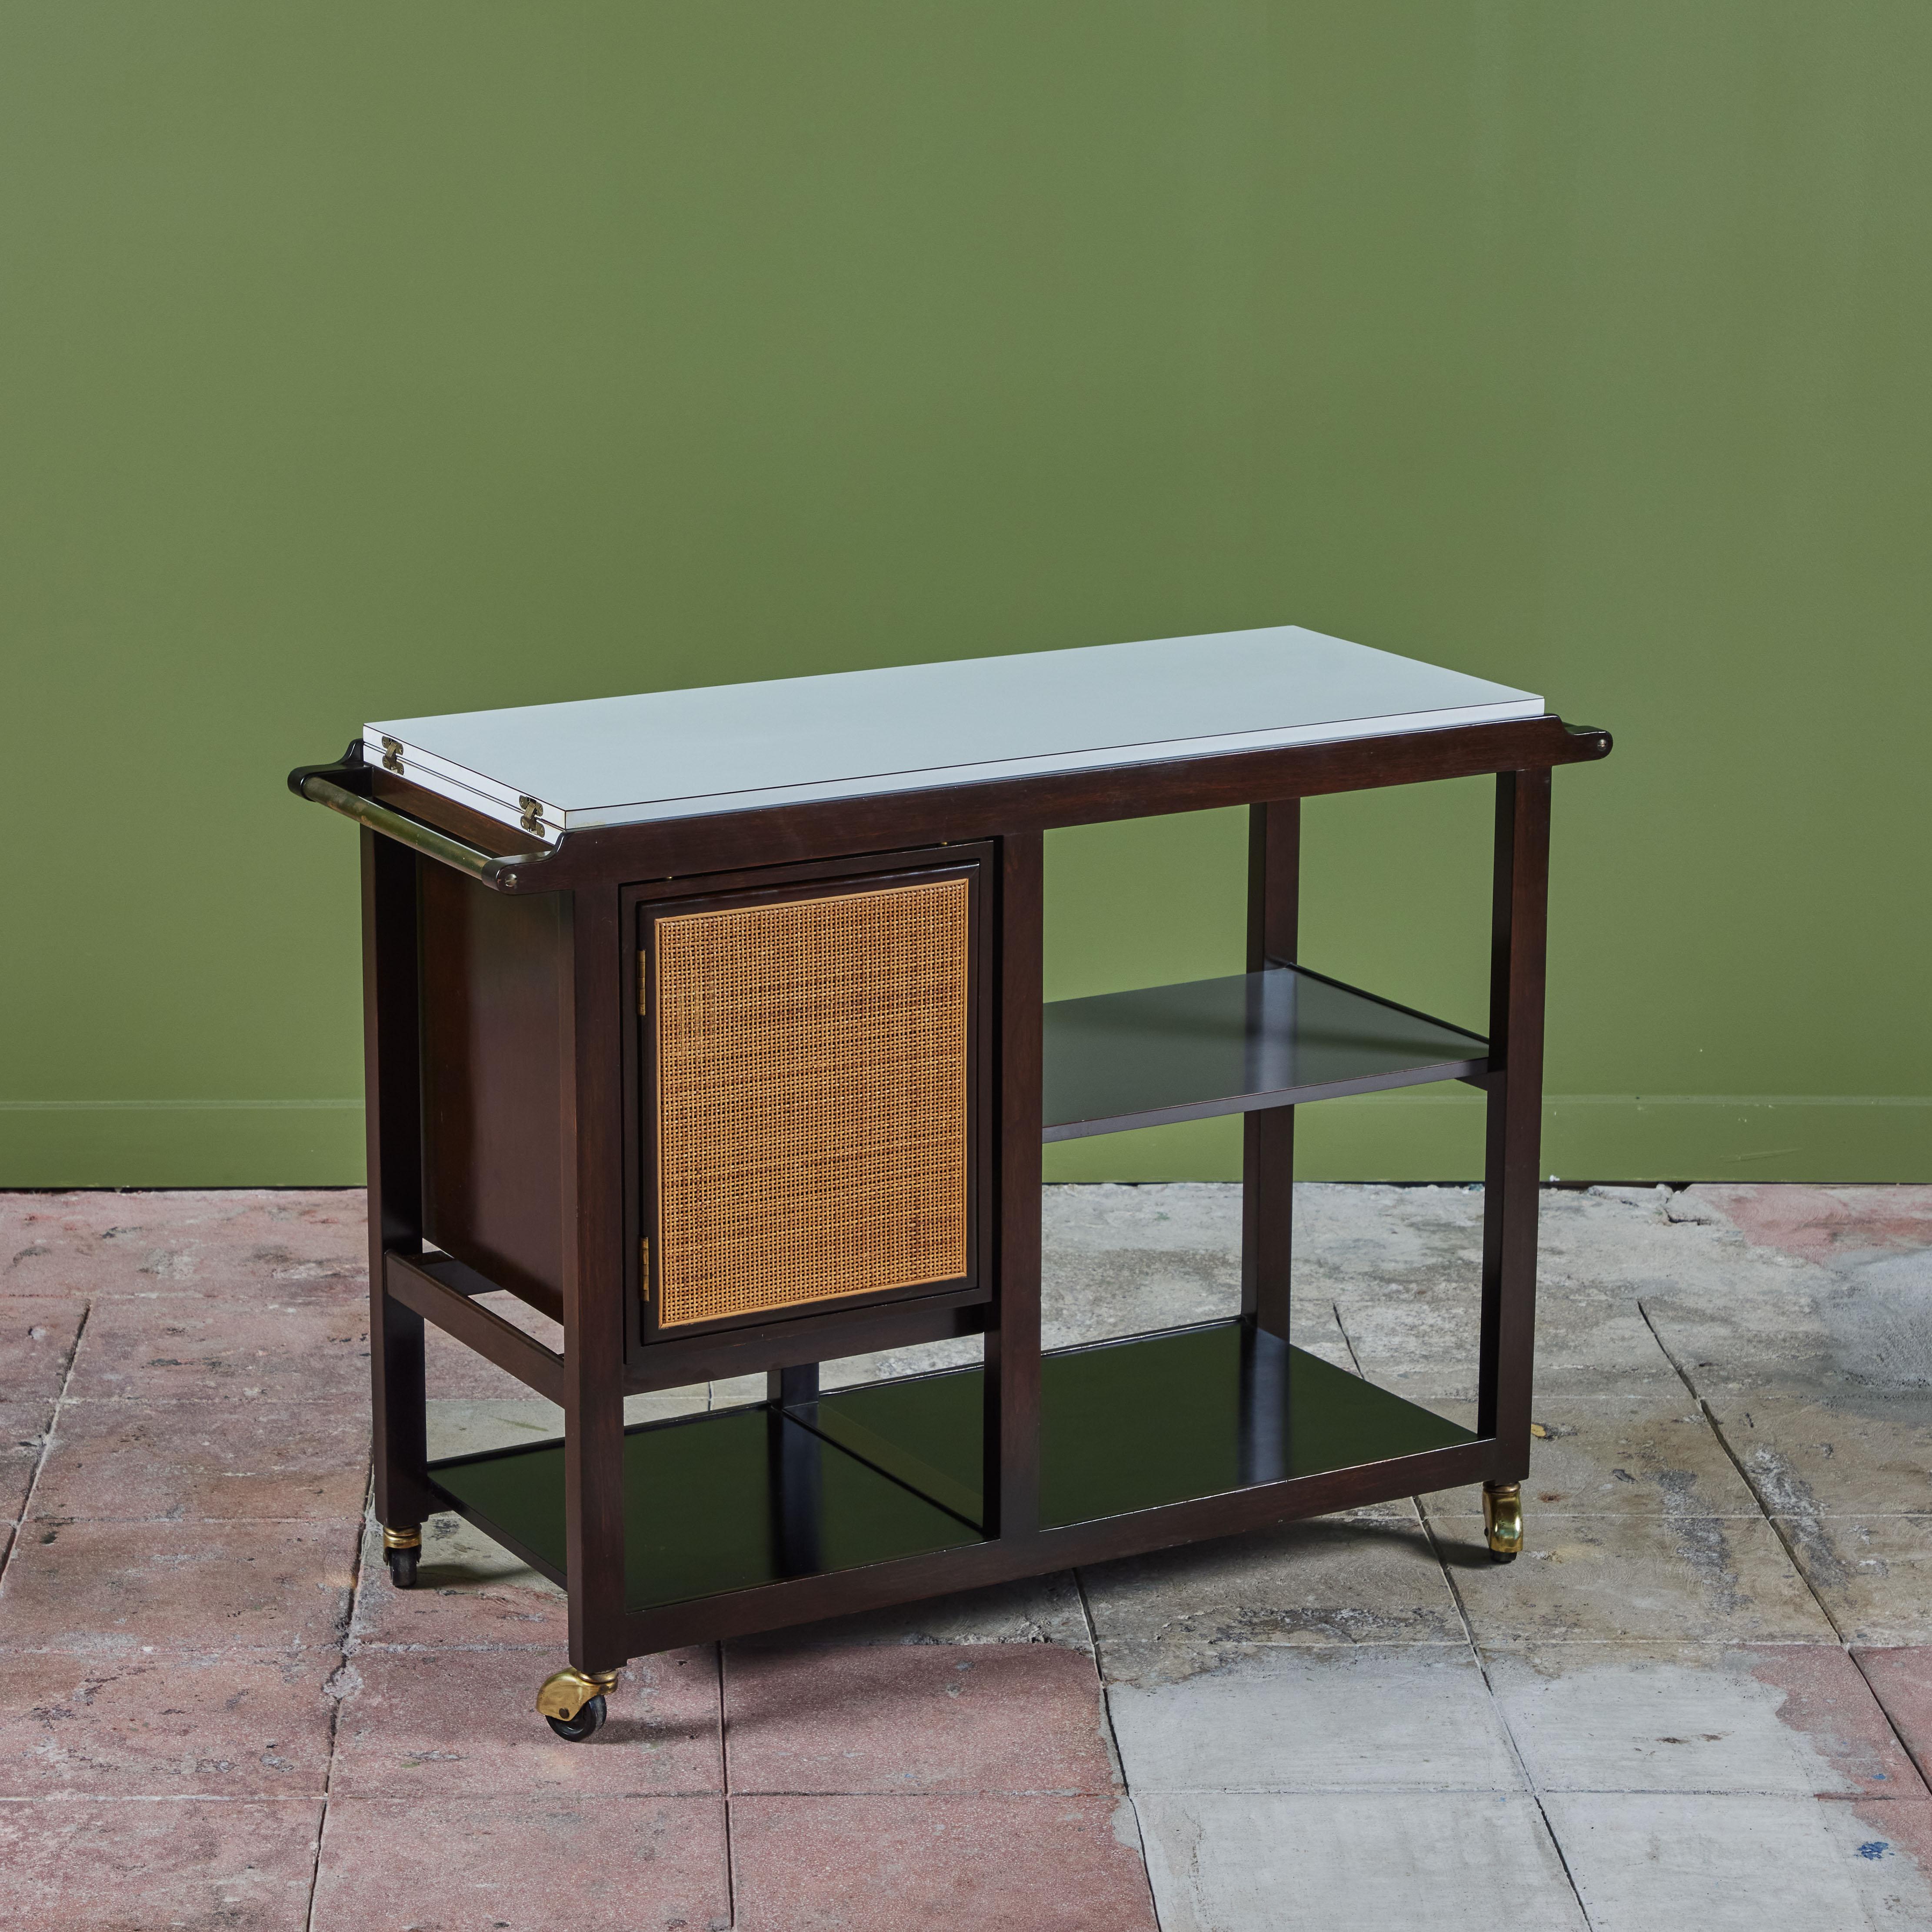 An ebonized bar cart by Edward Wormley for Dunbar, USA, c.1960s. The cart features a white laminate flip top surface with a double sided caned door for storage. The cart has three additional shelves and rests on brass casters for easy mobility.